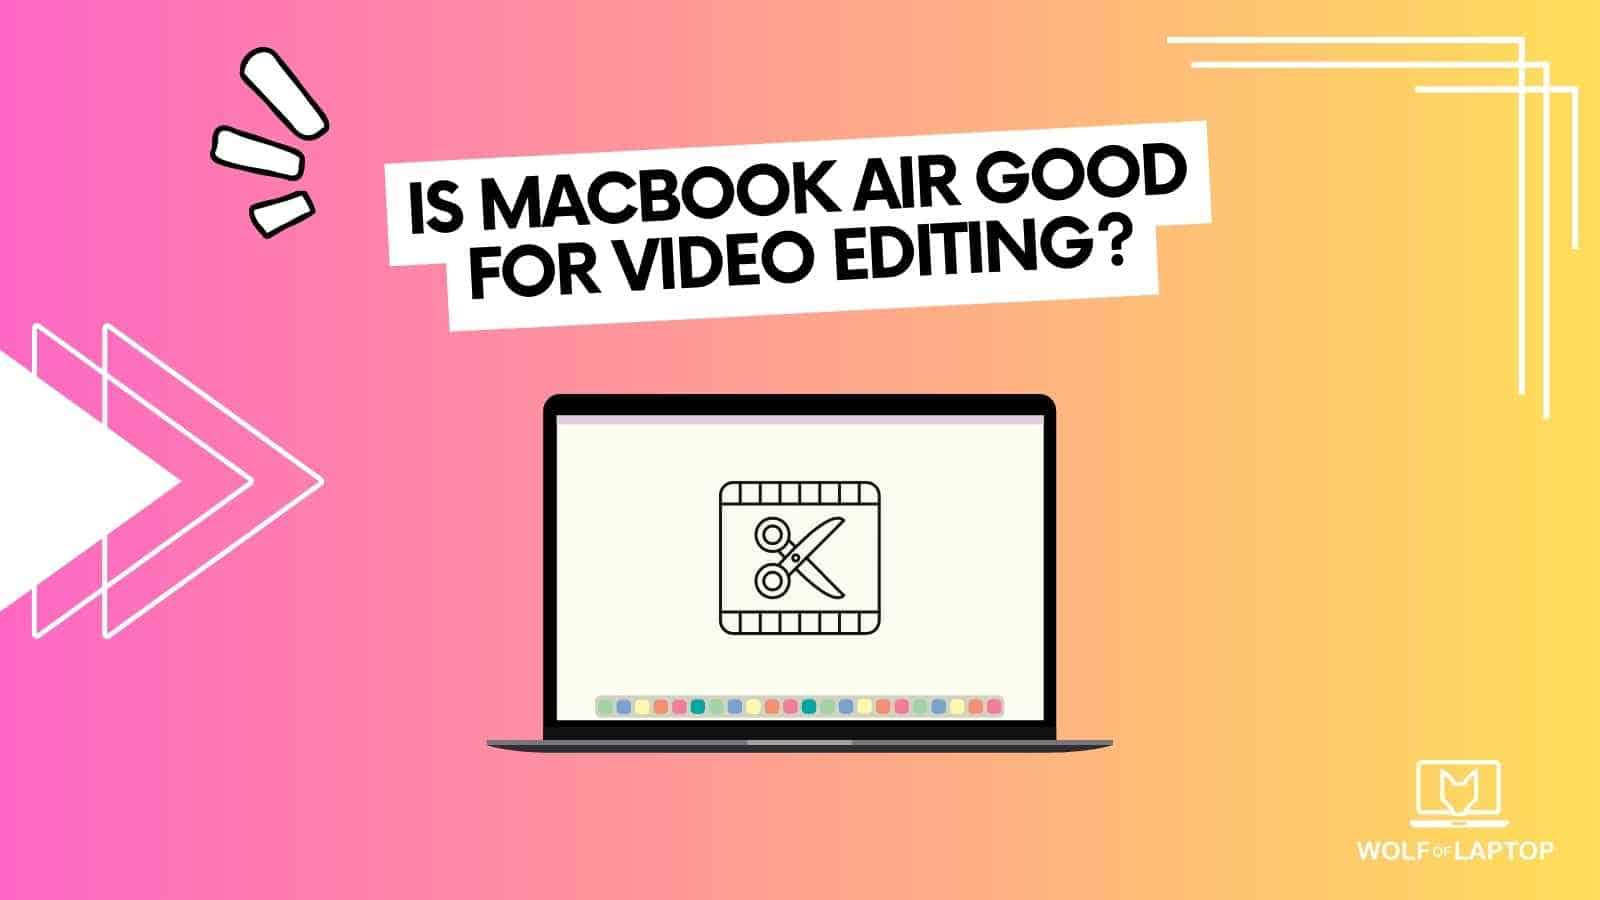 is macbook air good for video editing?